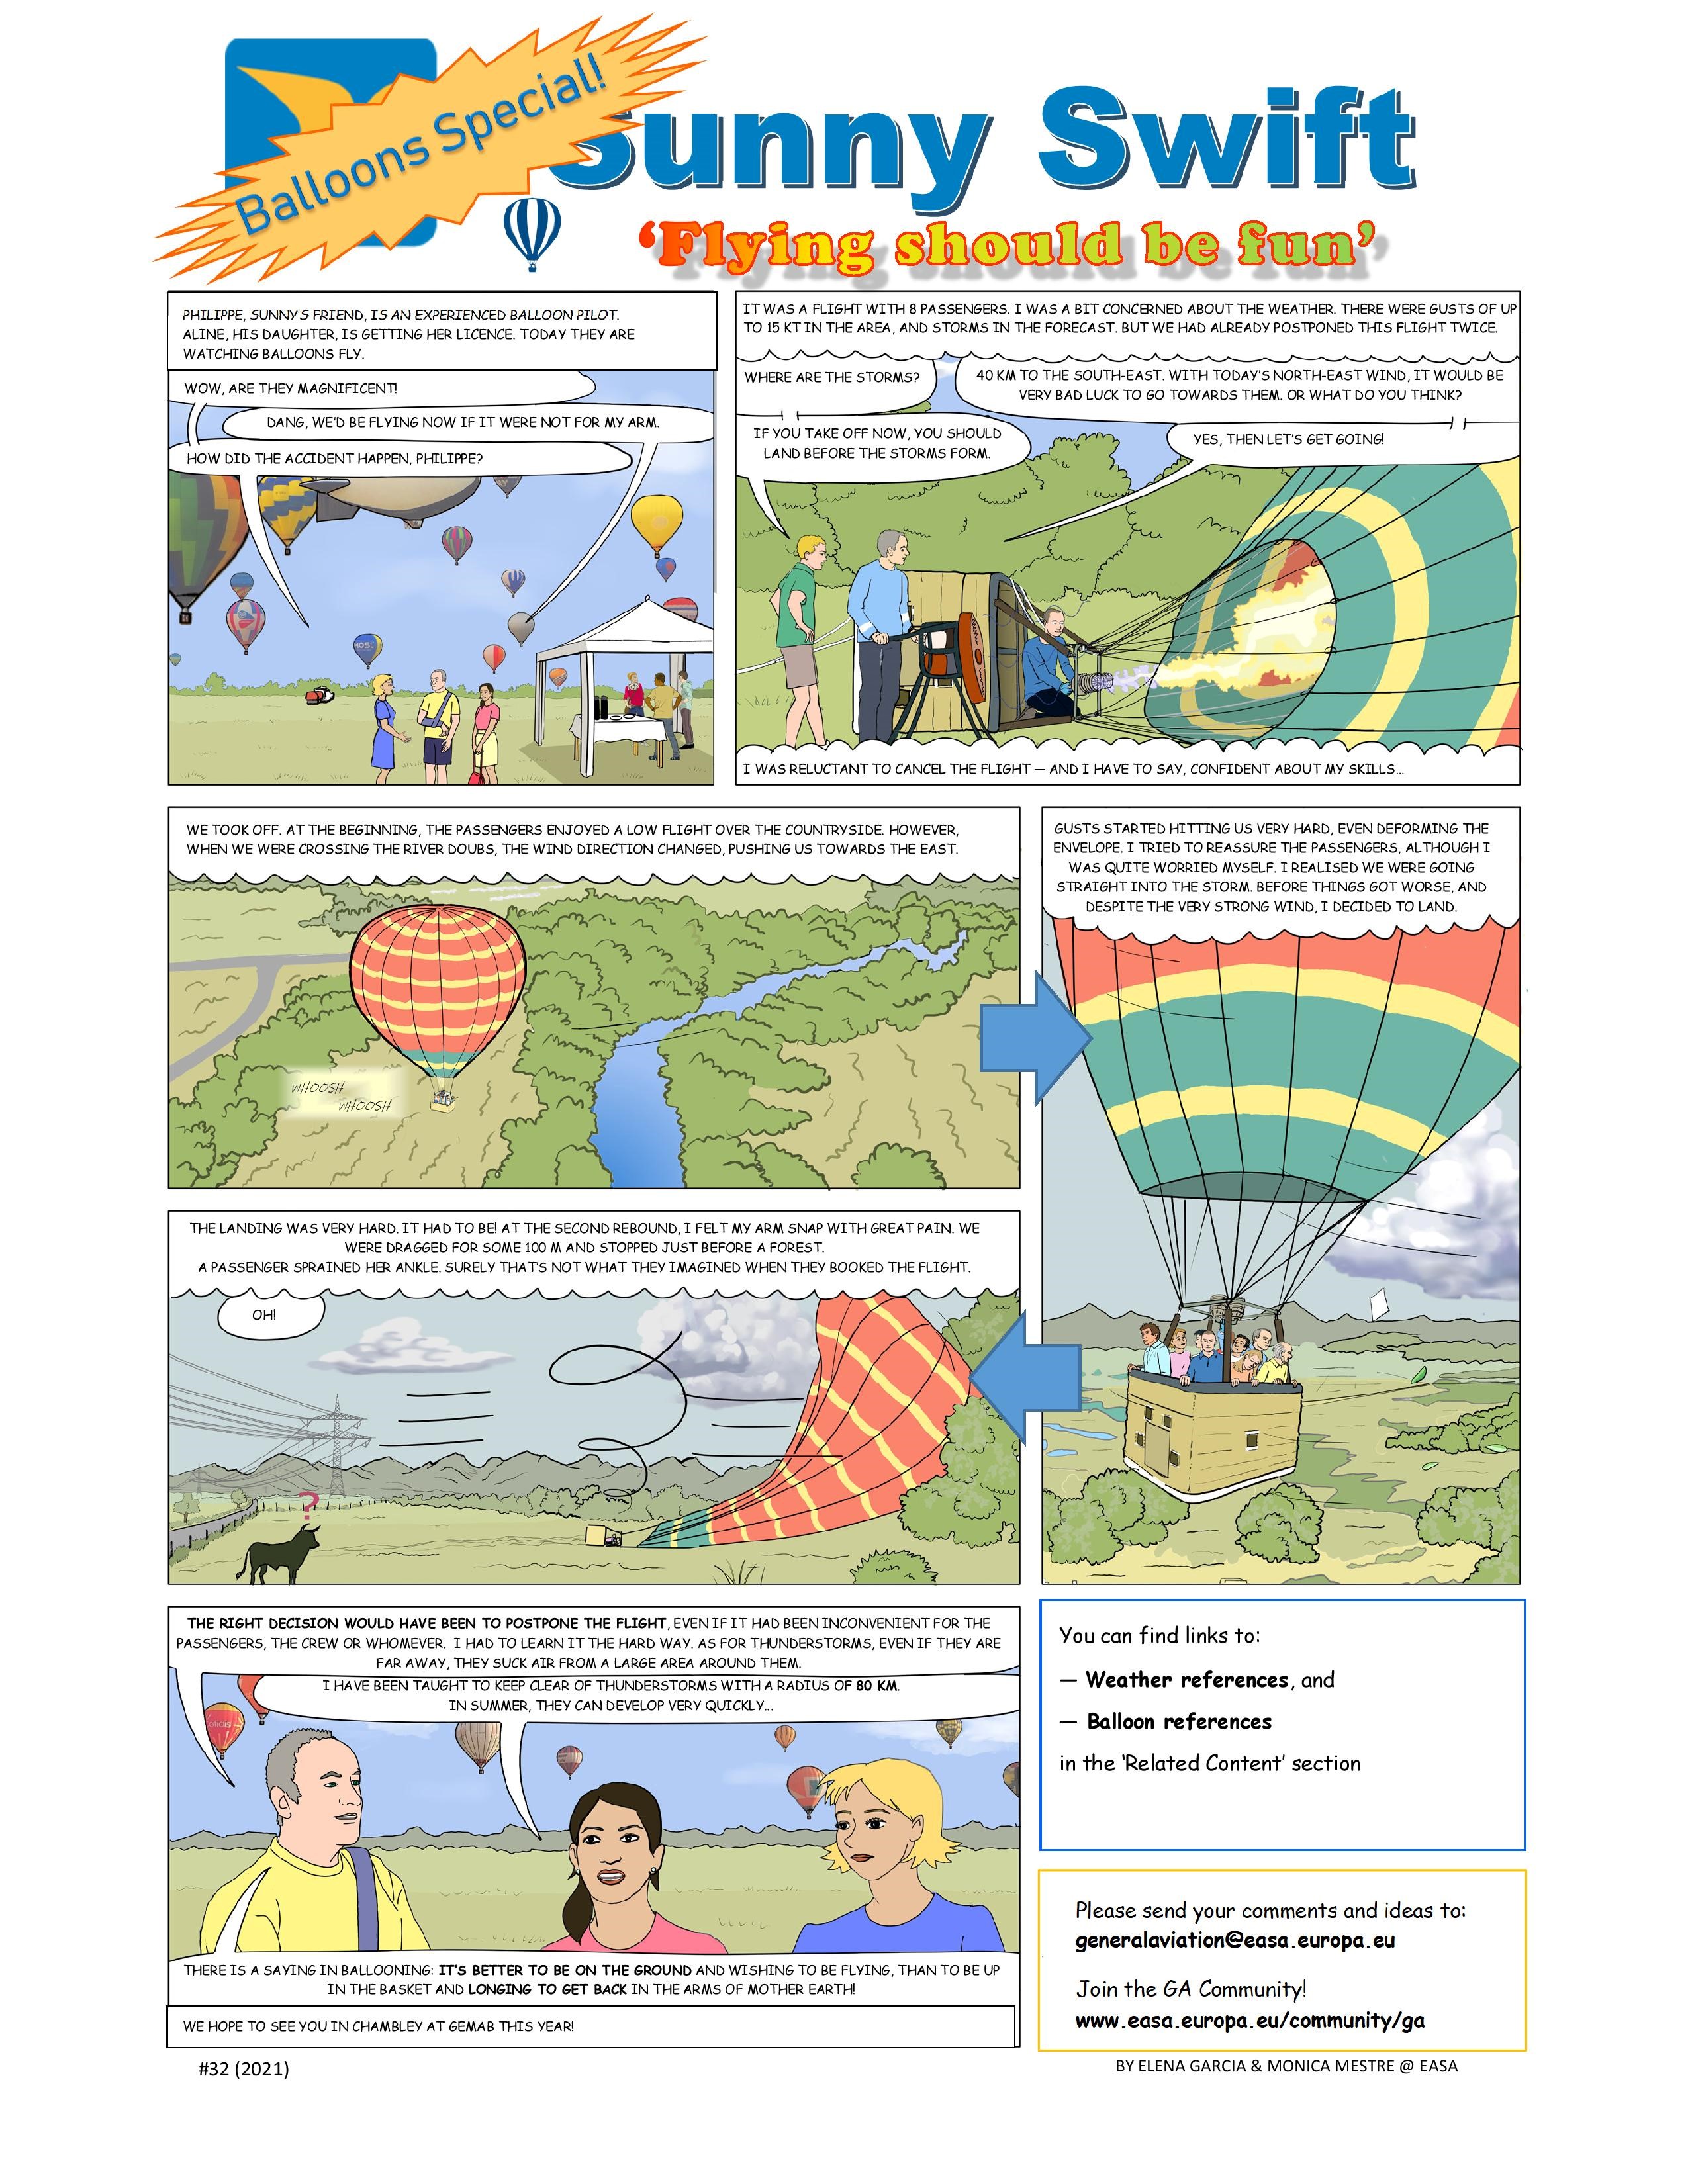 Sunny Swift Issue 32 - Balloons Special